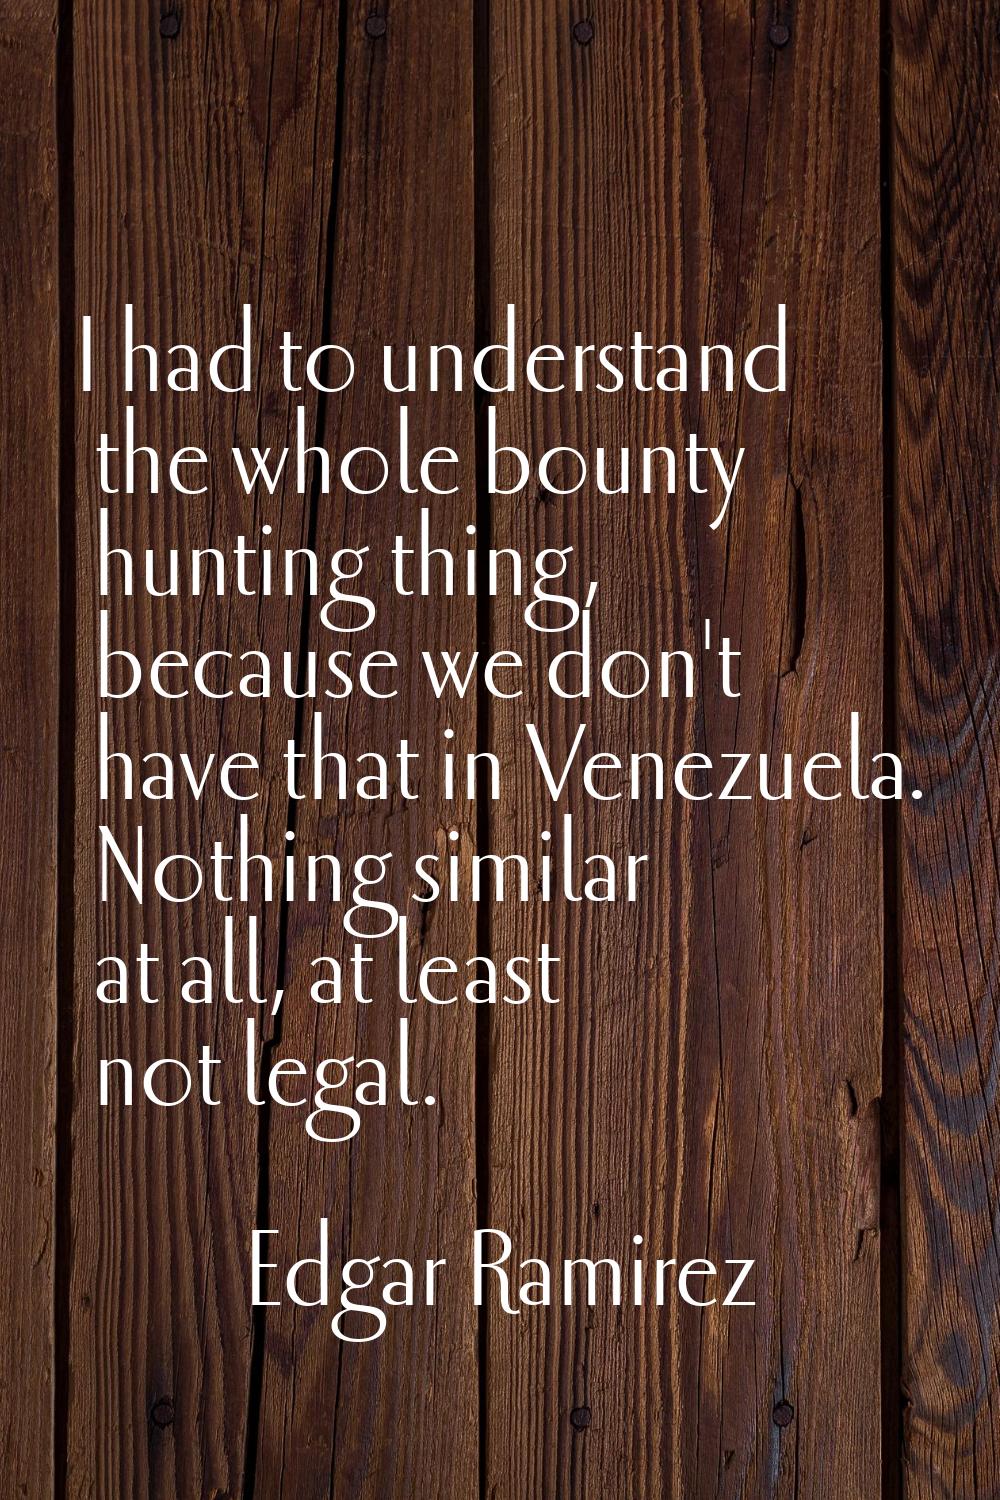 I had to understand the whole bounty hunting thing, because we don't have that in Venezuela. Nothin